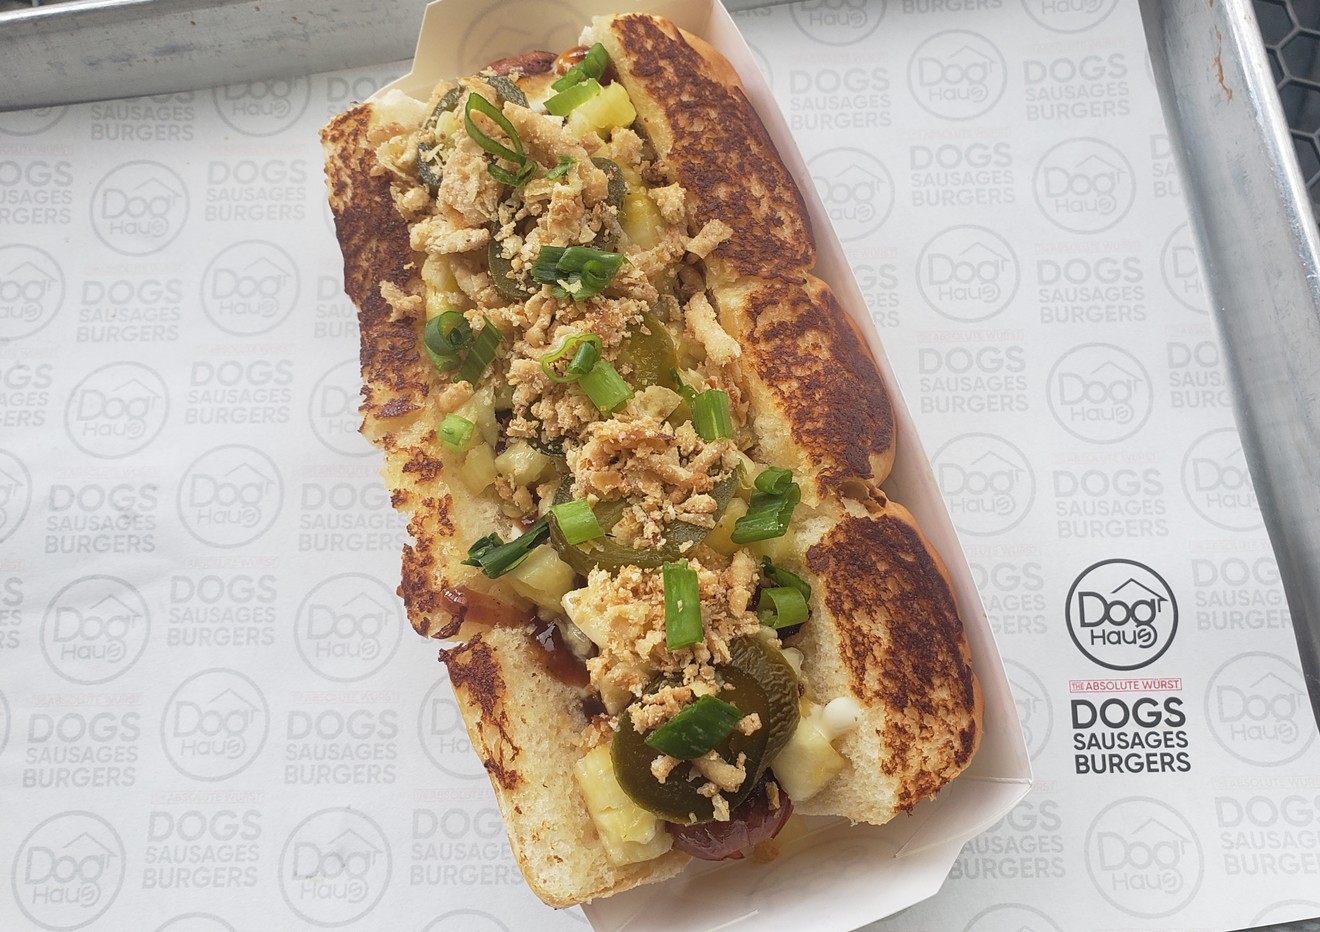 Pineapple Express dog from Dog Haus.